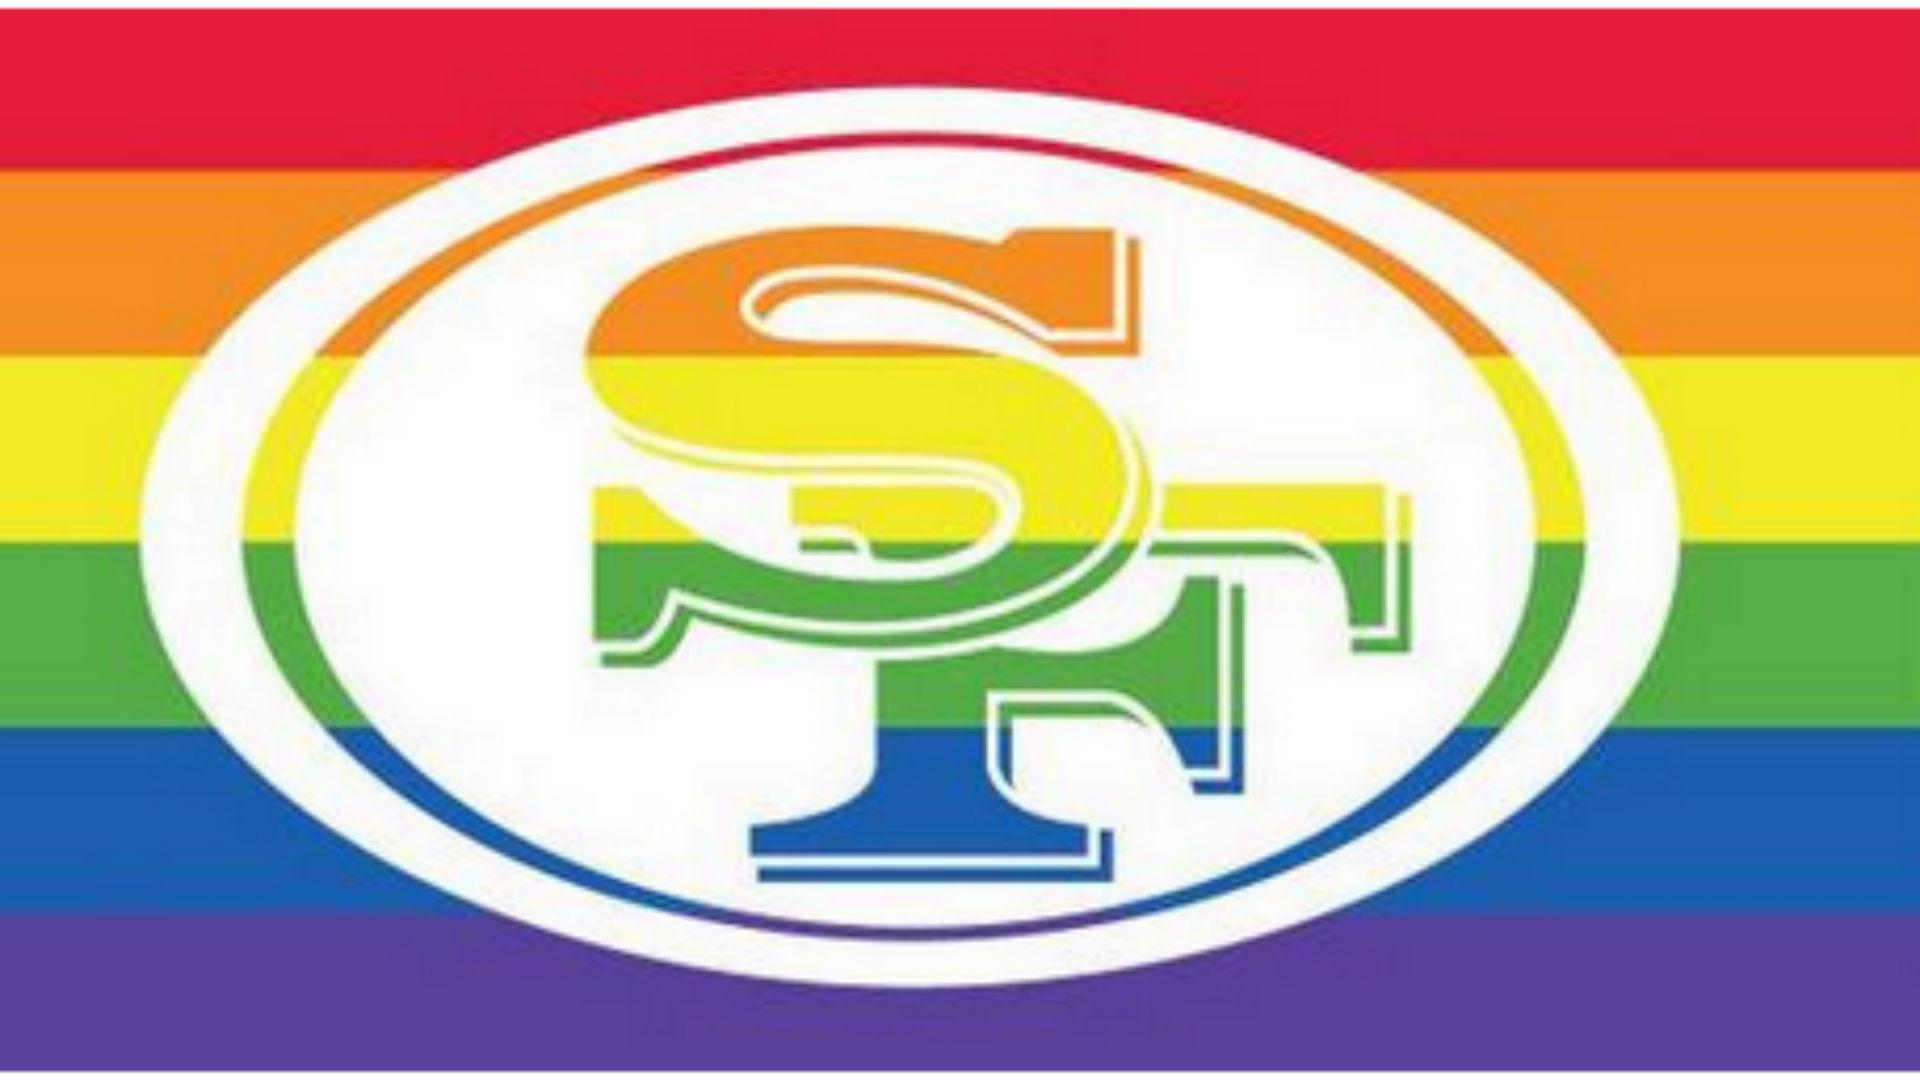 Ers wave gay pride flag to support marriage equality